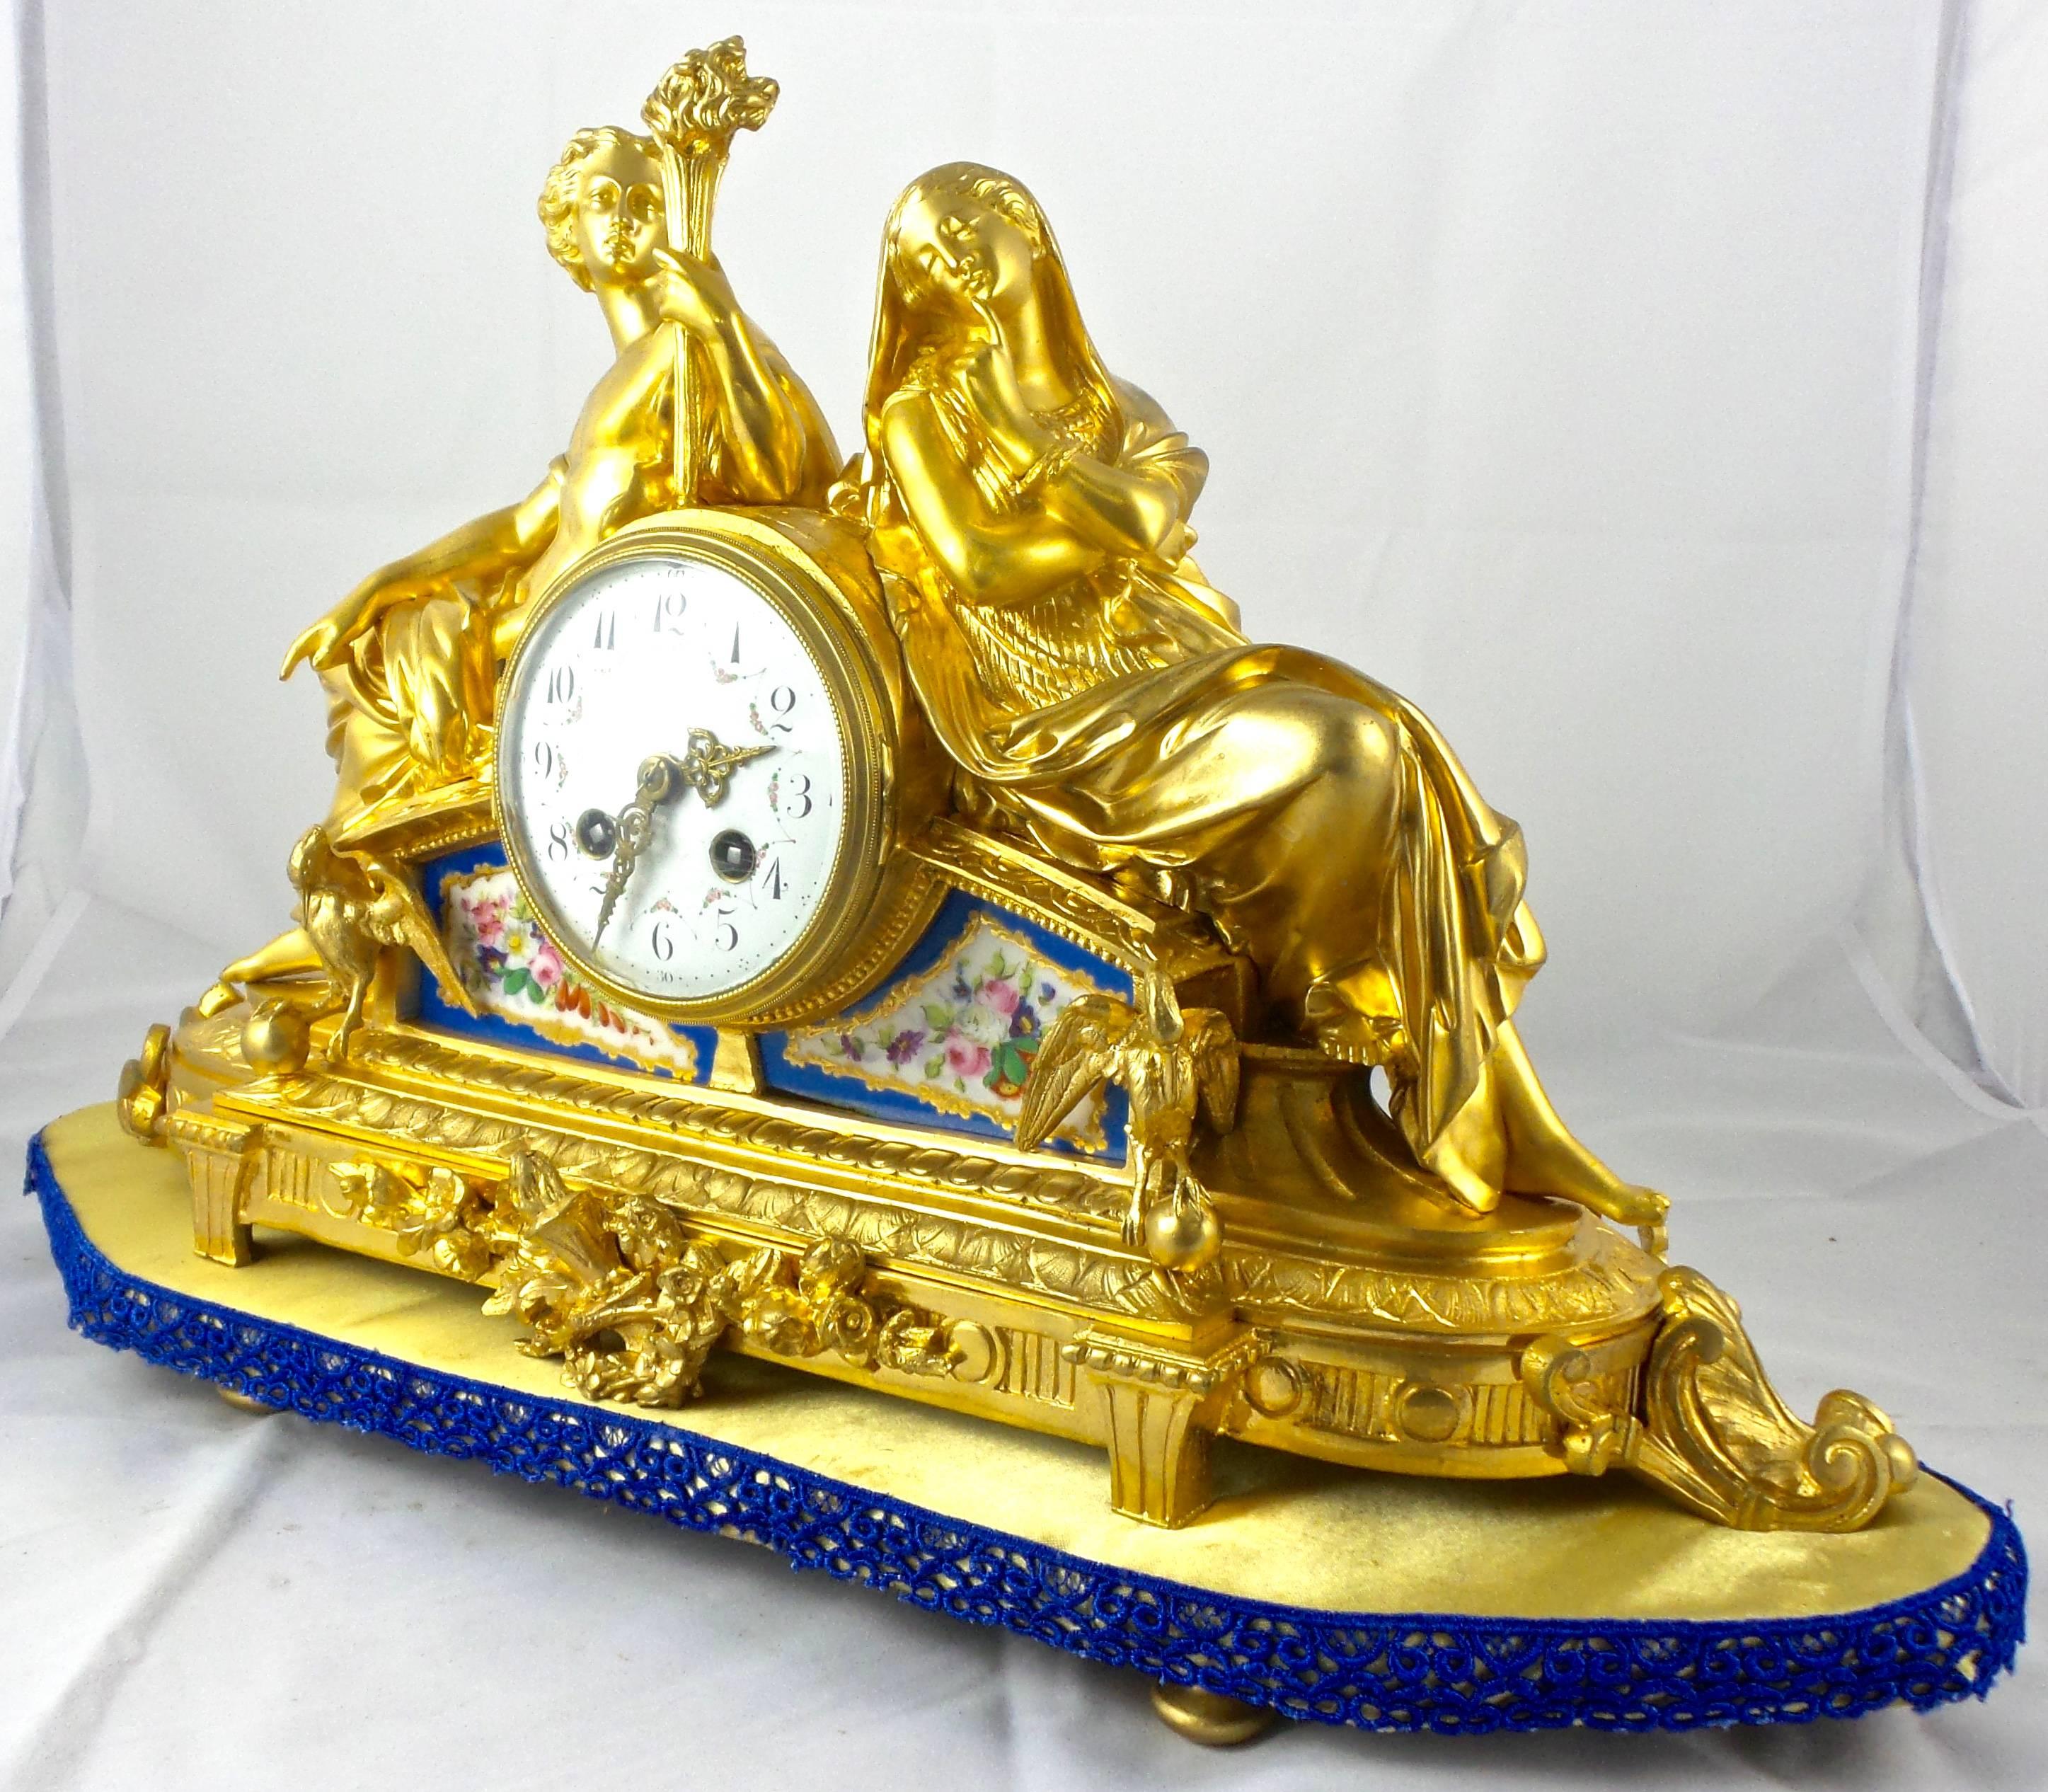 Mid-19th Century 19th Century French Mantel Clock Gilt Ormolu Bronze and Blue Sevres Porcelain